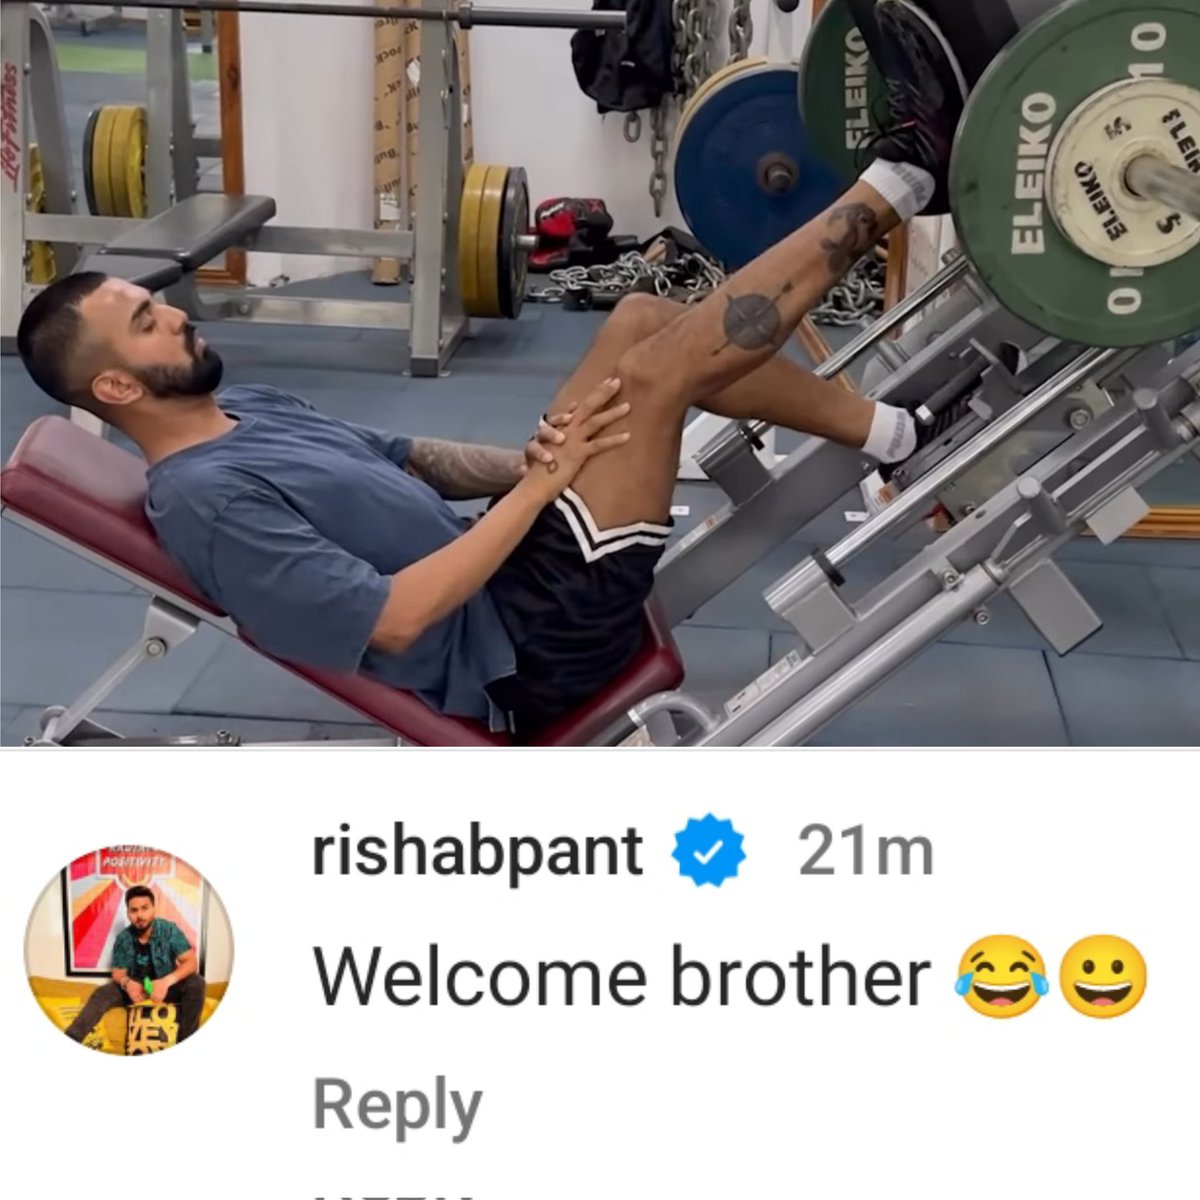 KL Rahul has started his rehab at NCA followed by a cheeky reply by Pant.